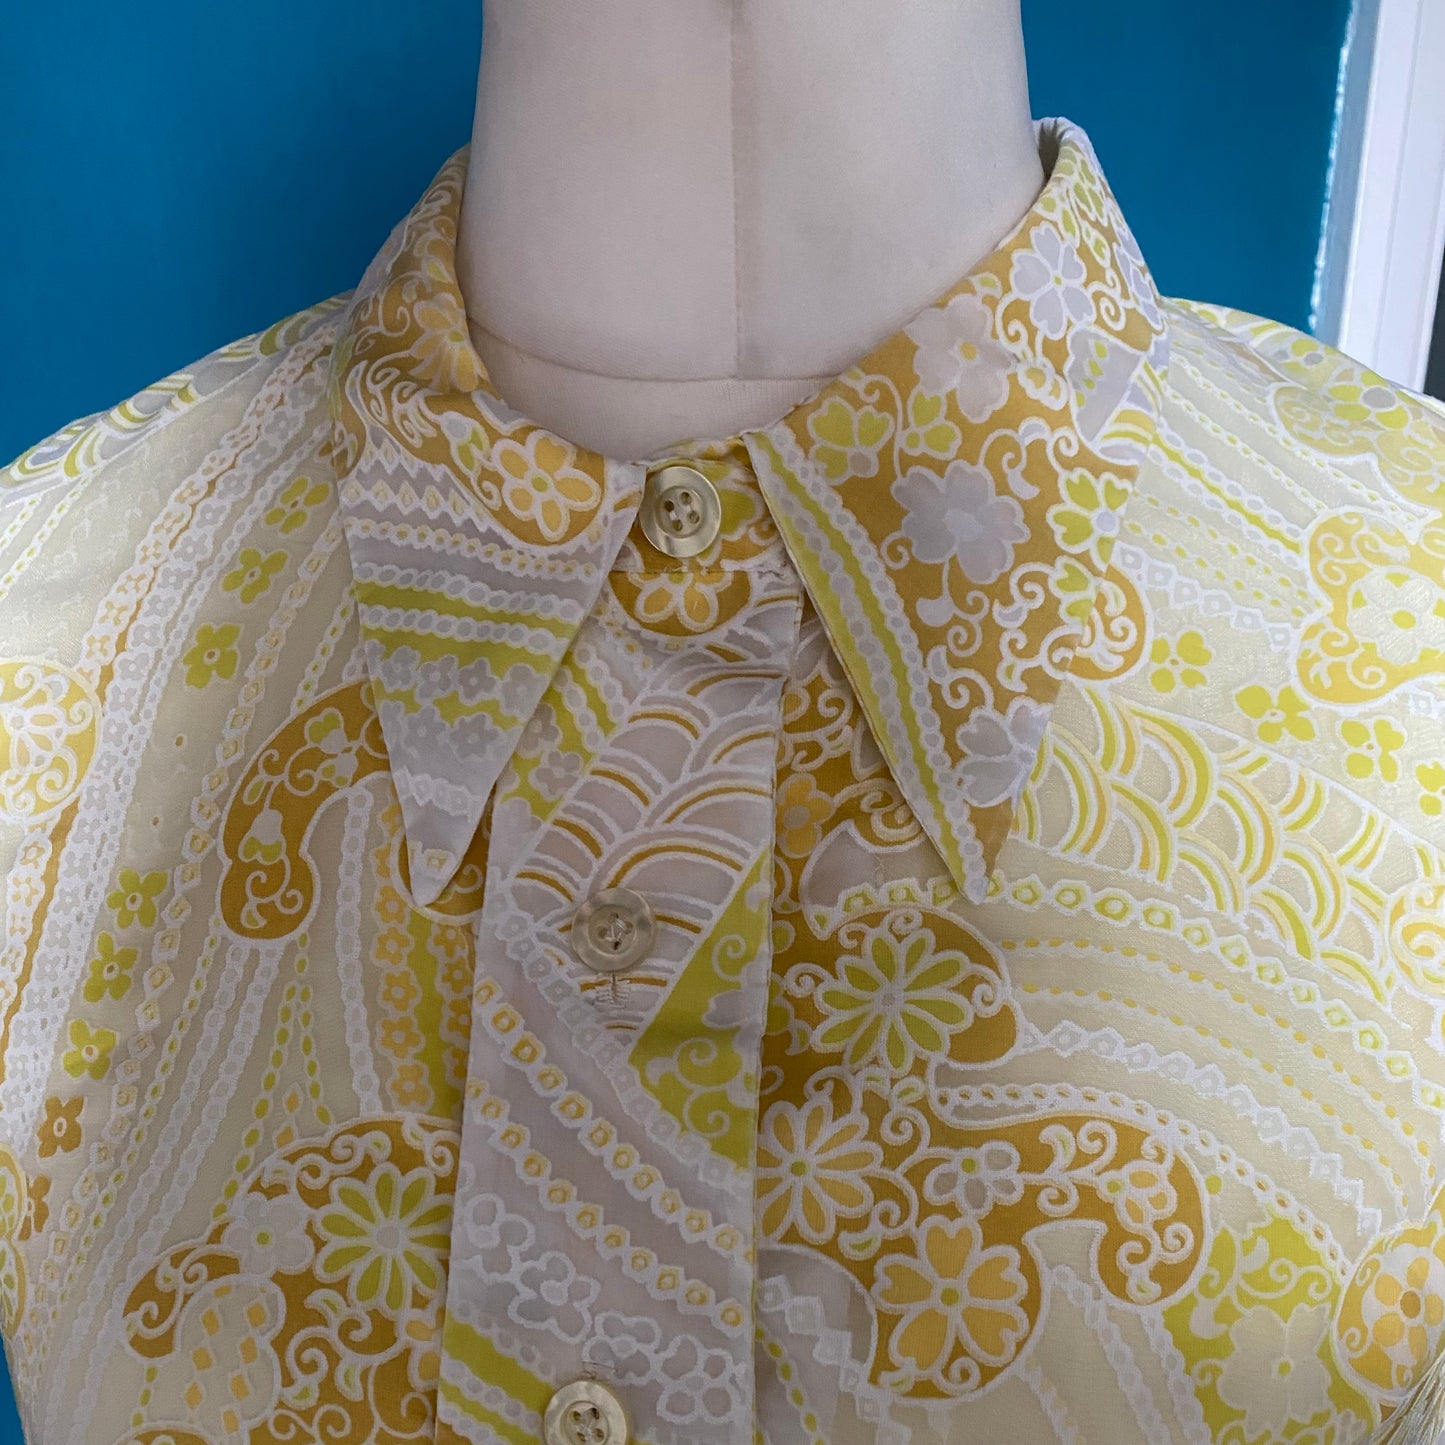 60s Mod Style Yellow Psychedelic Floral Shift Dress. Approx  UK size 14-16